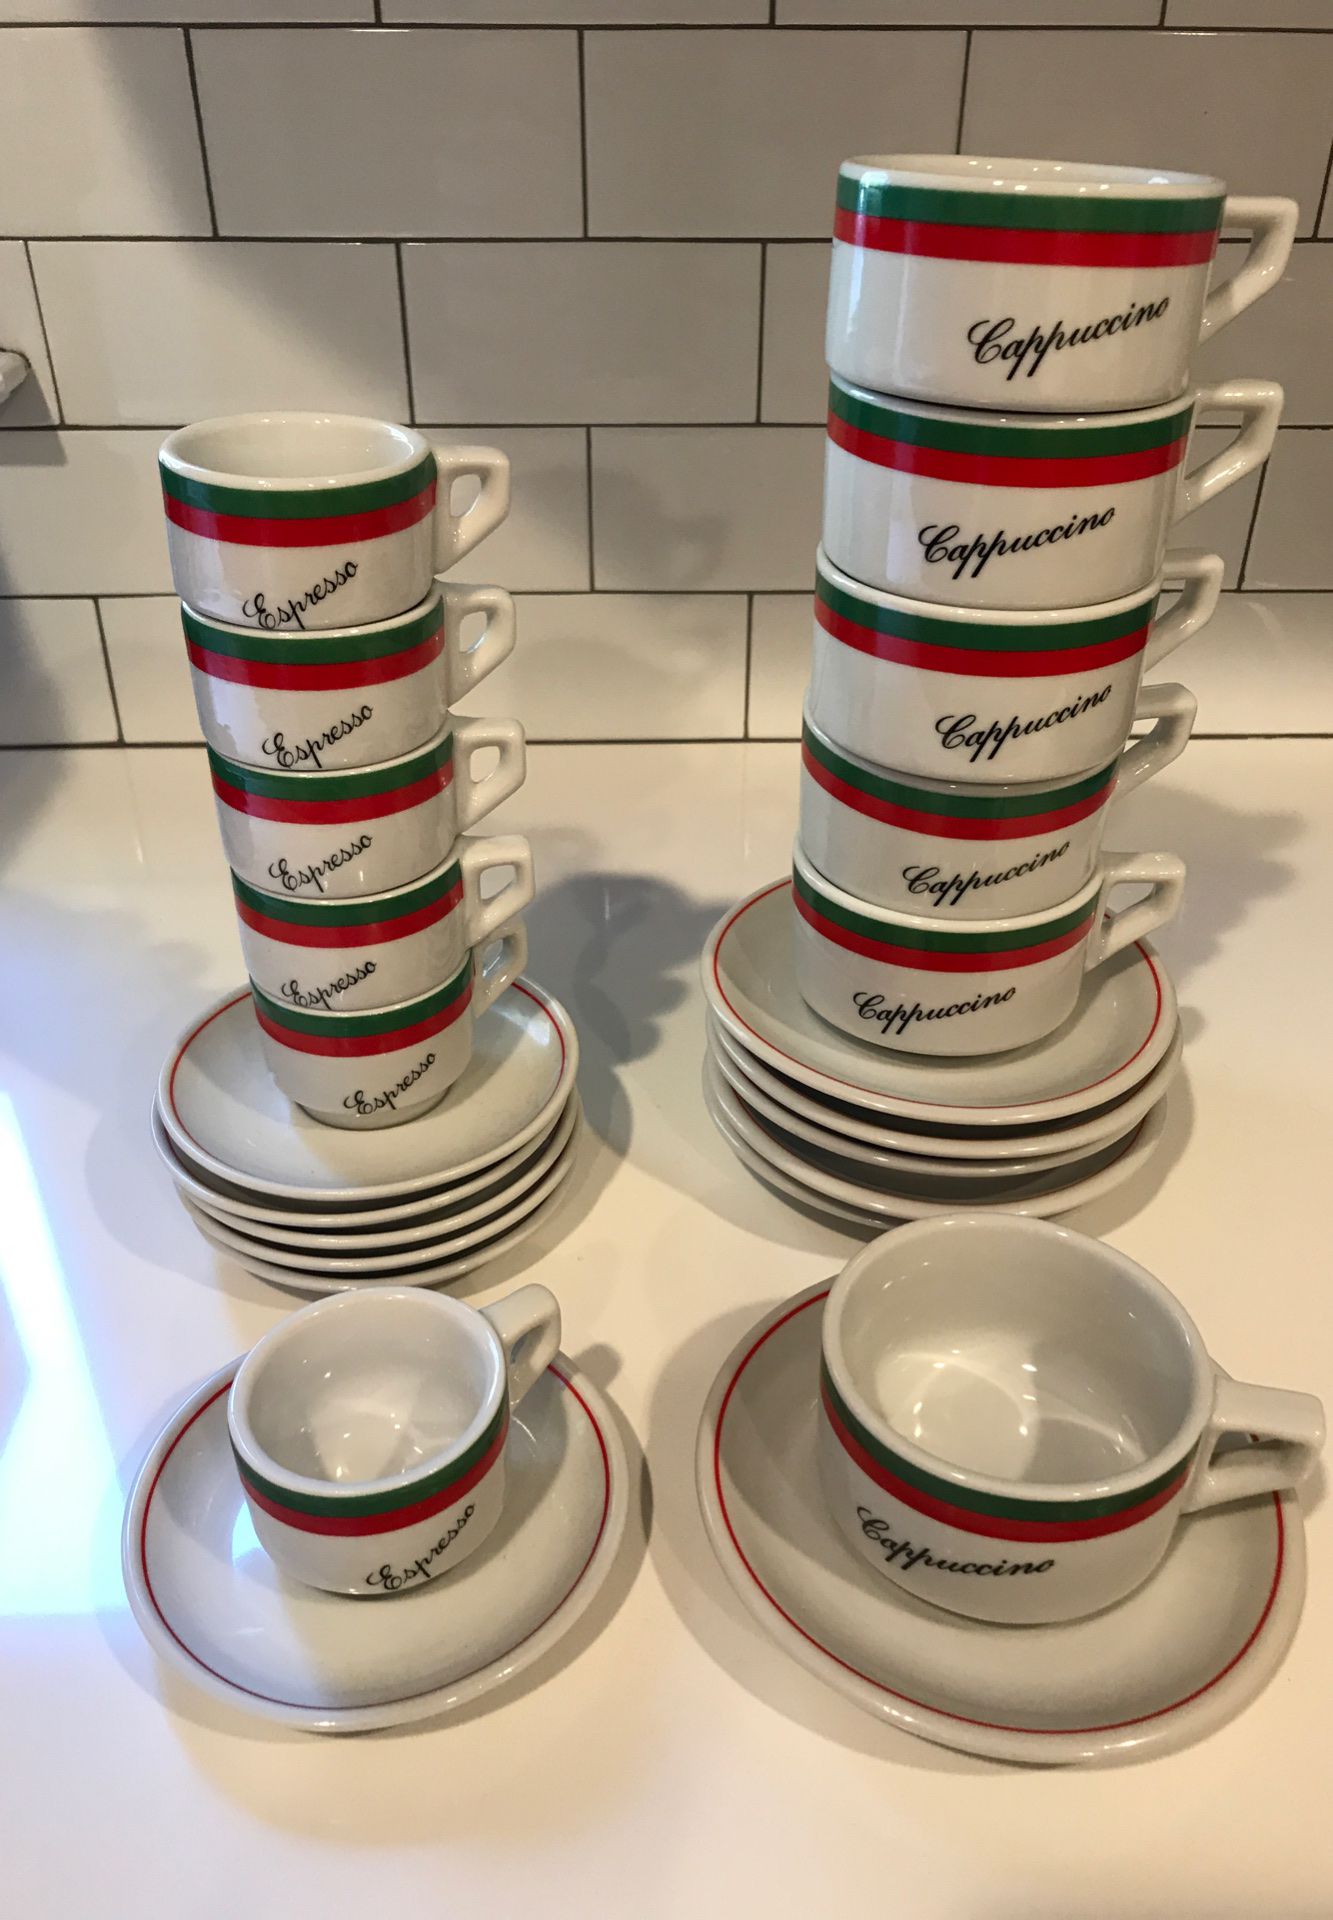 Espresso and cappuccino cups and saucers